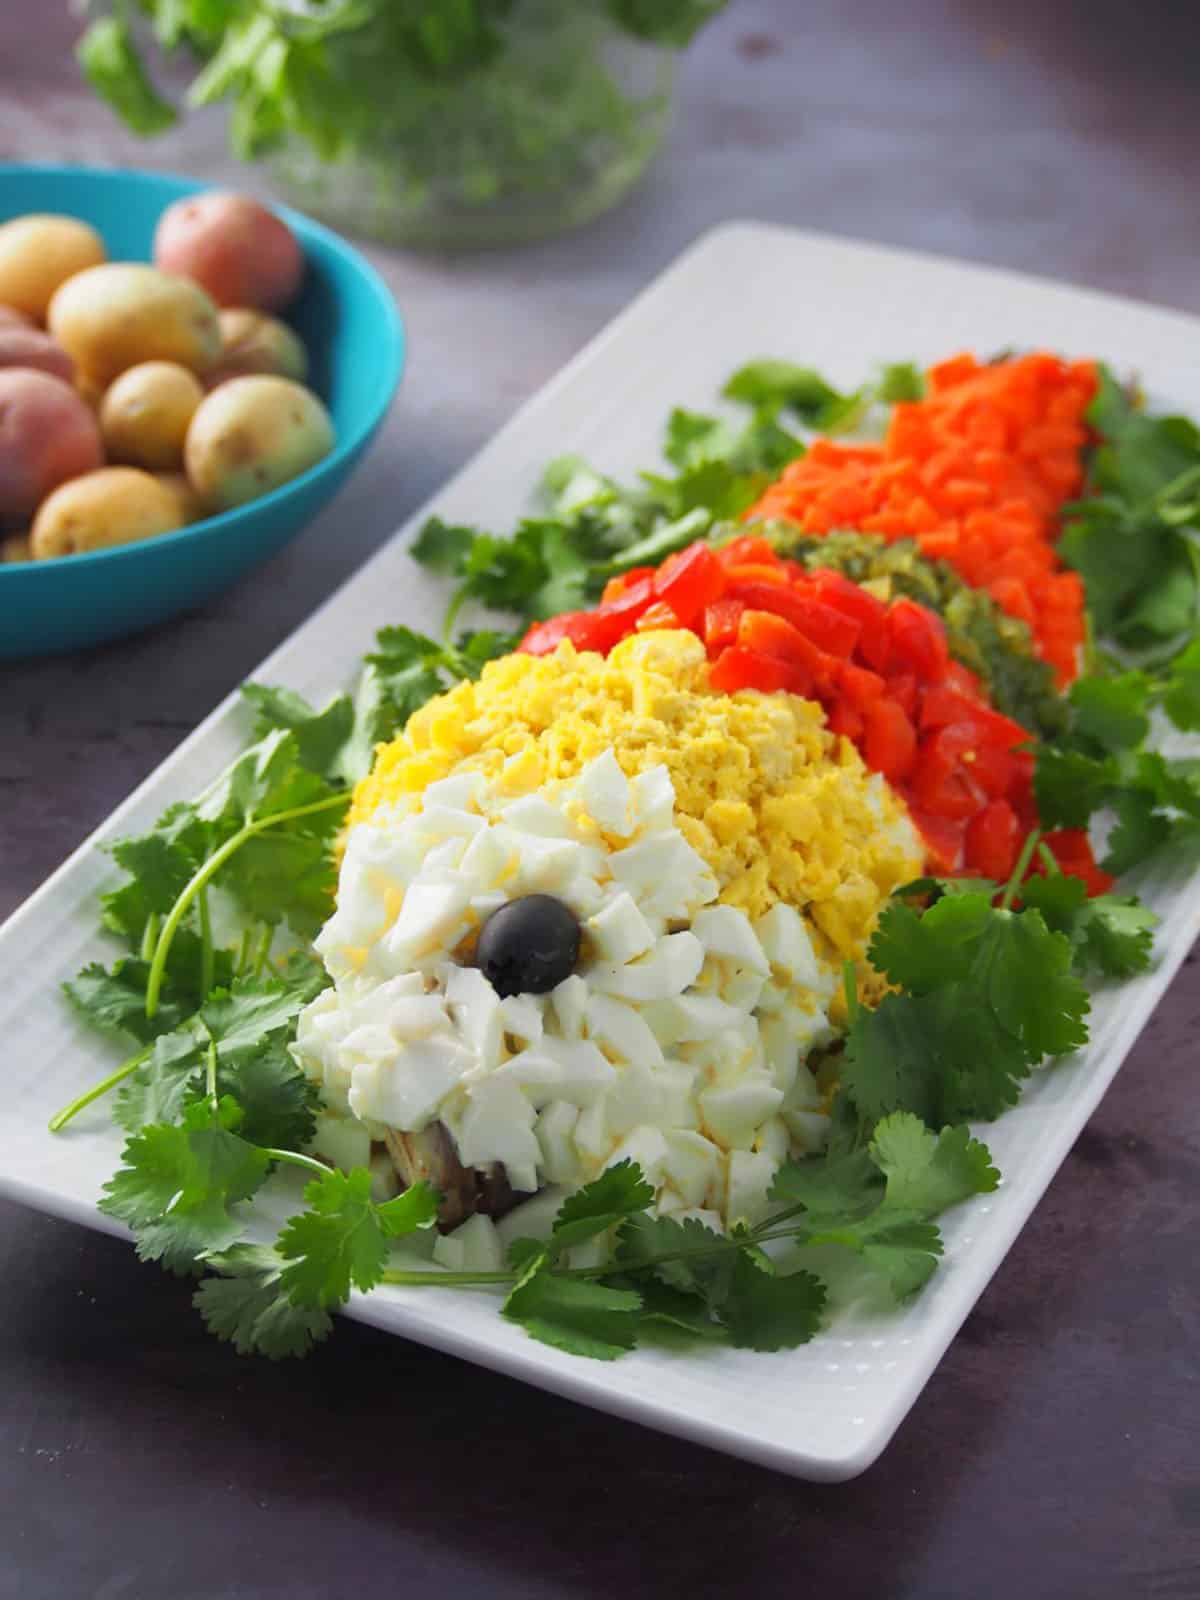 pescao en mayonesa or steamed fishdecorated with chopped eggs, roasted bell peppers, sweet relish, and carrots